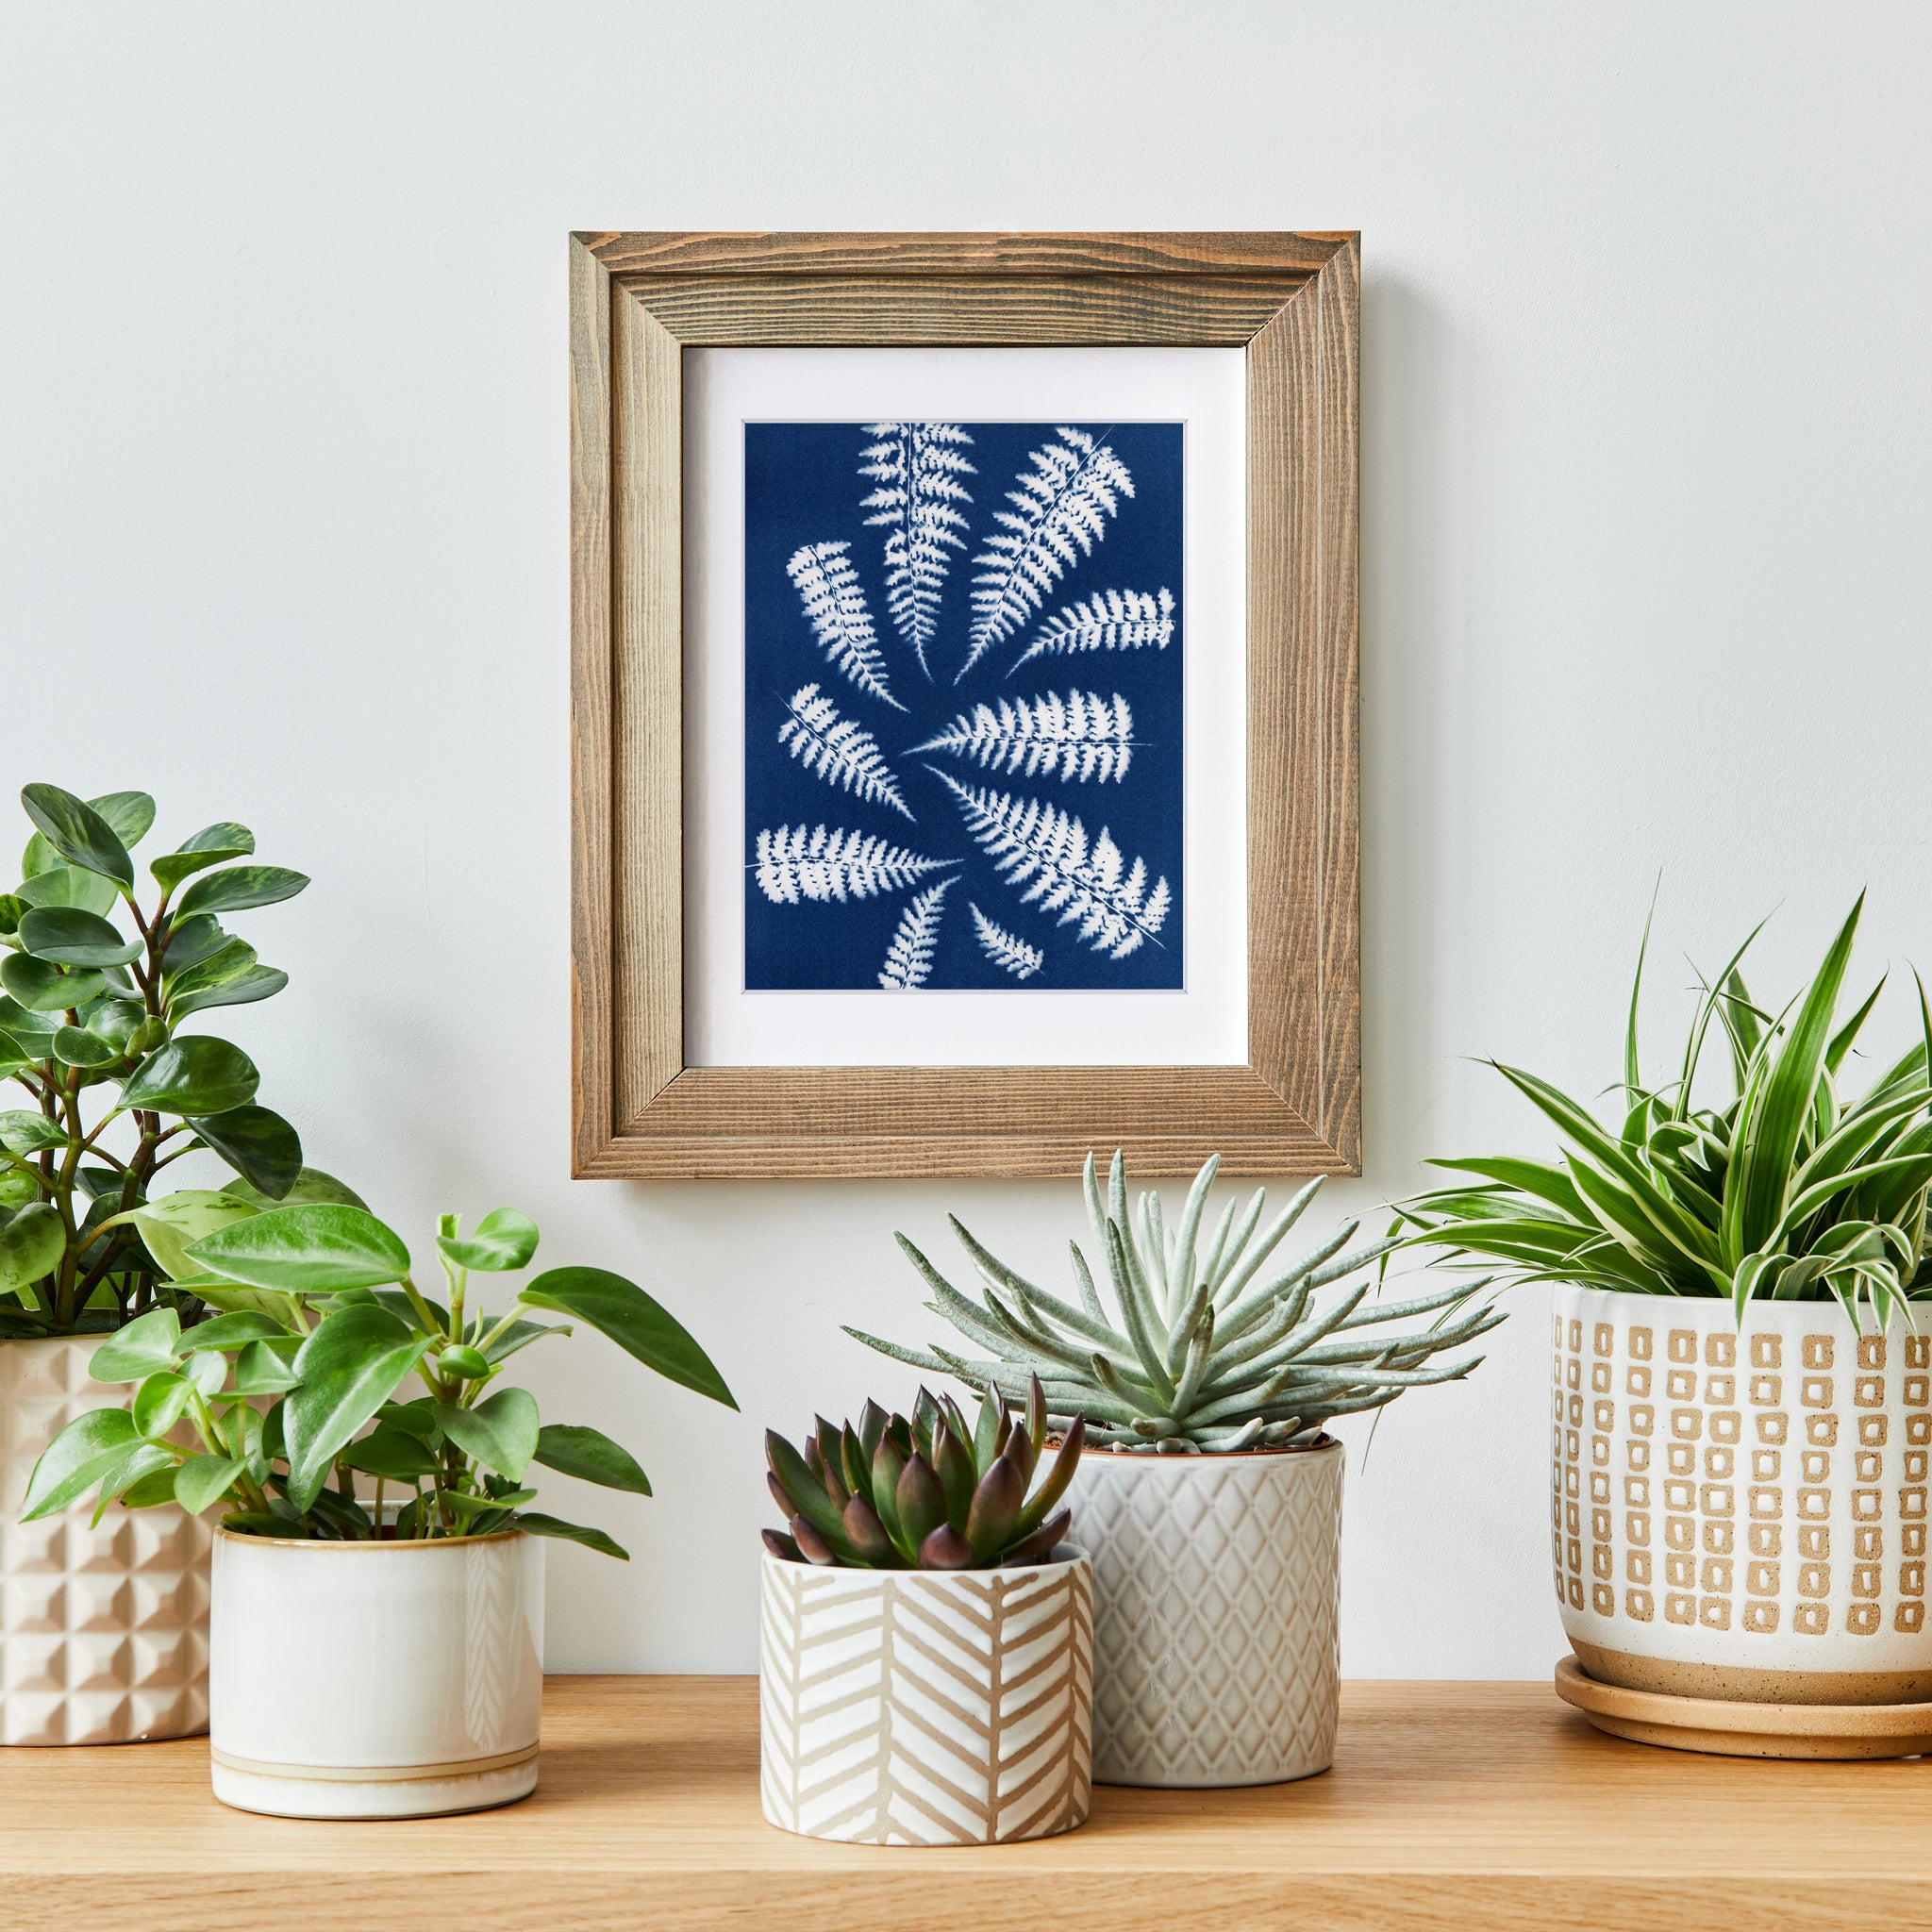 Blue fern cyanotype art print in a frame with houseplants, cactus